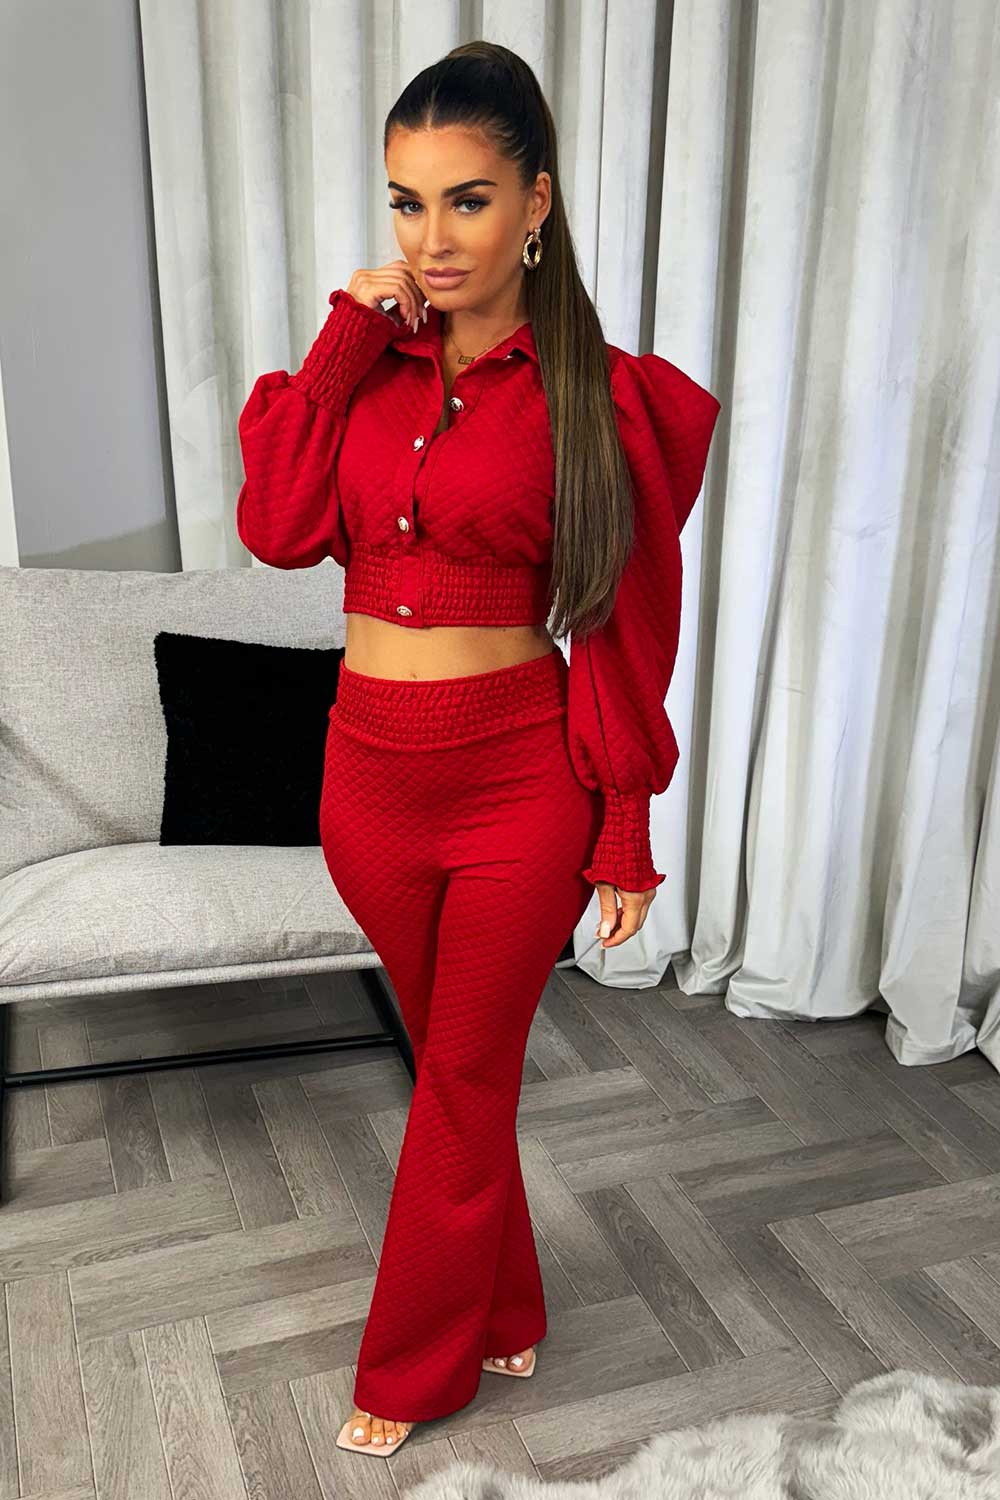 red quilted puff sleeve top with gold buttons and flared trousers co ord set going out christmas party outfit